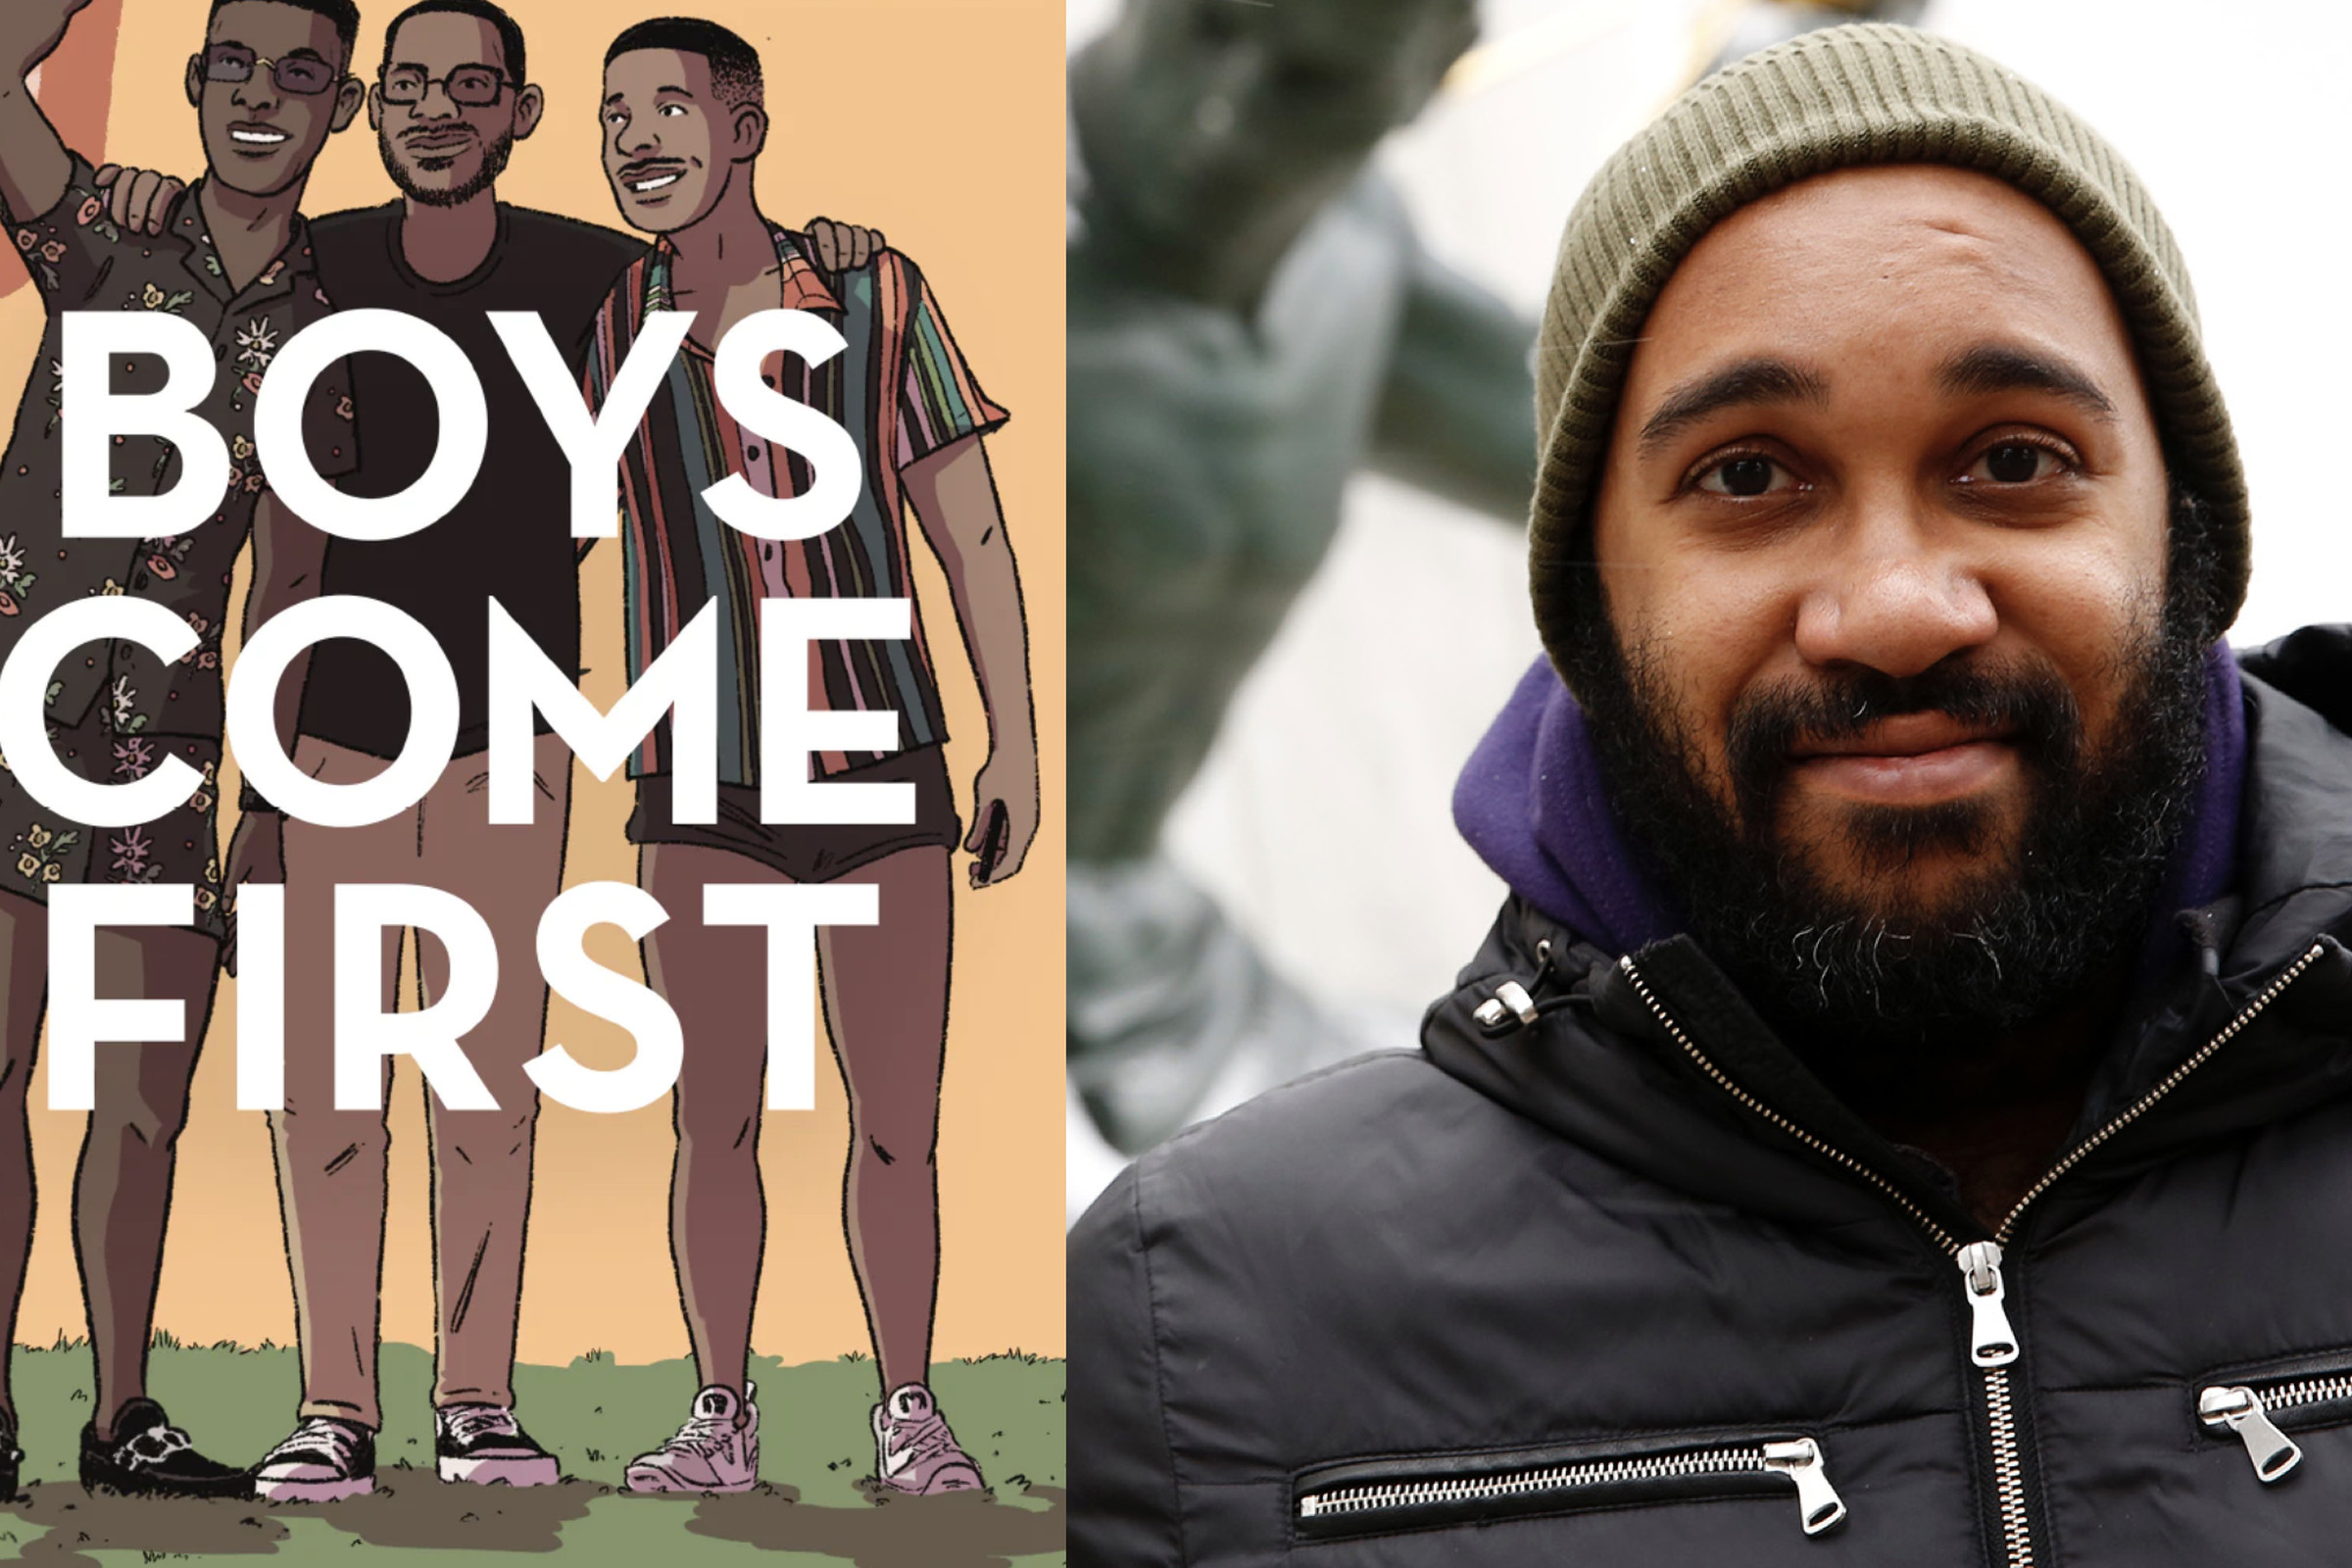 Boys Come First’s cover art and a photo of Aaron Foley.